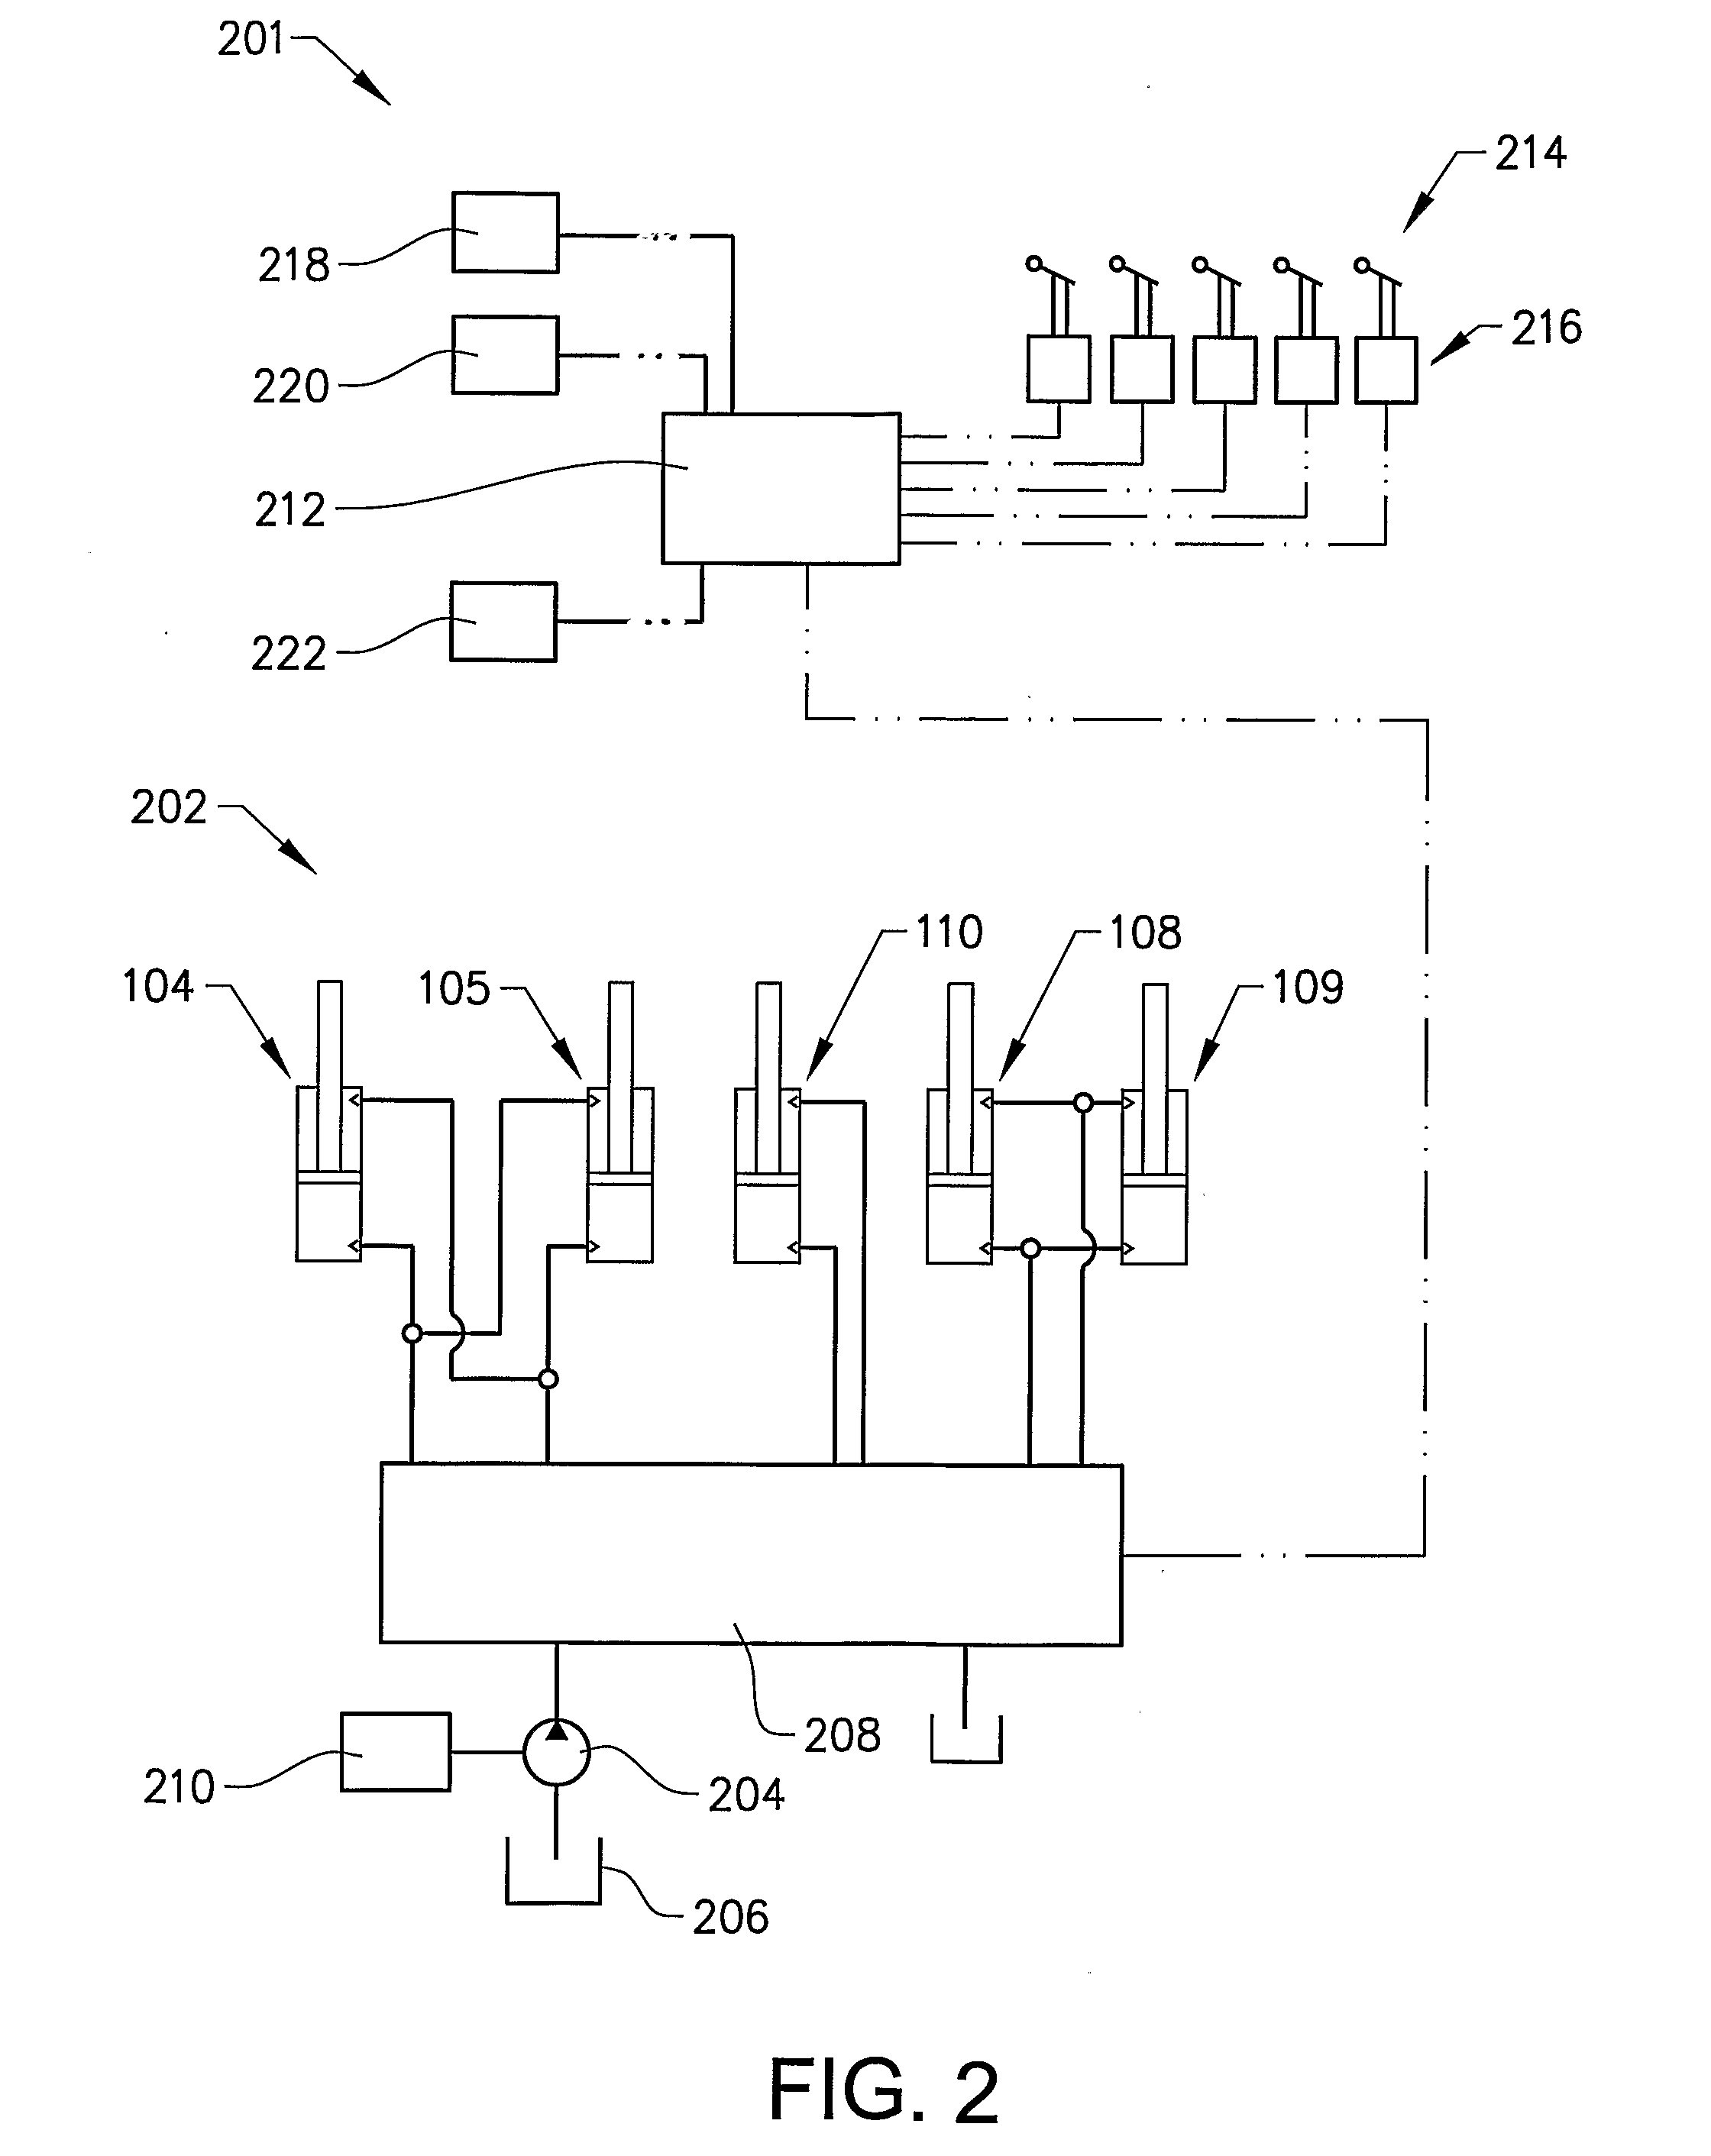 Method for controlling a movement of a vehicle component